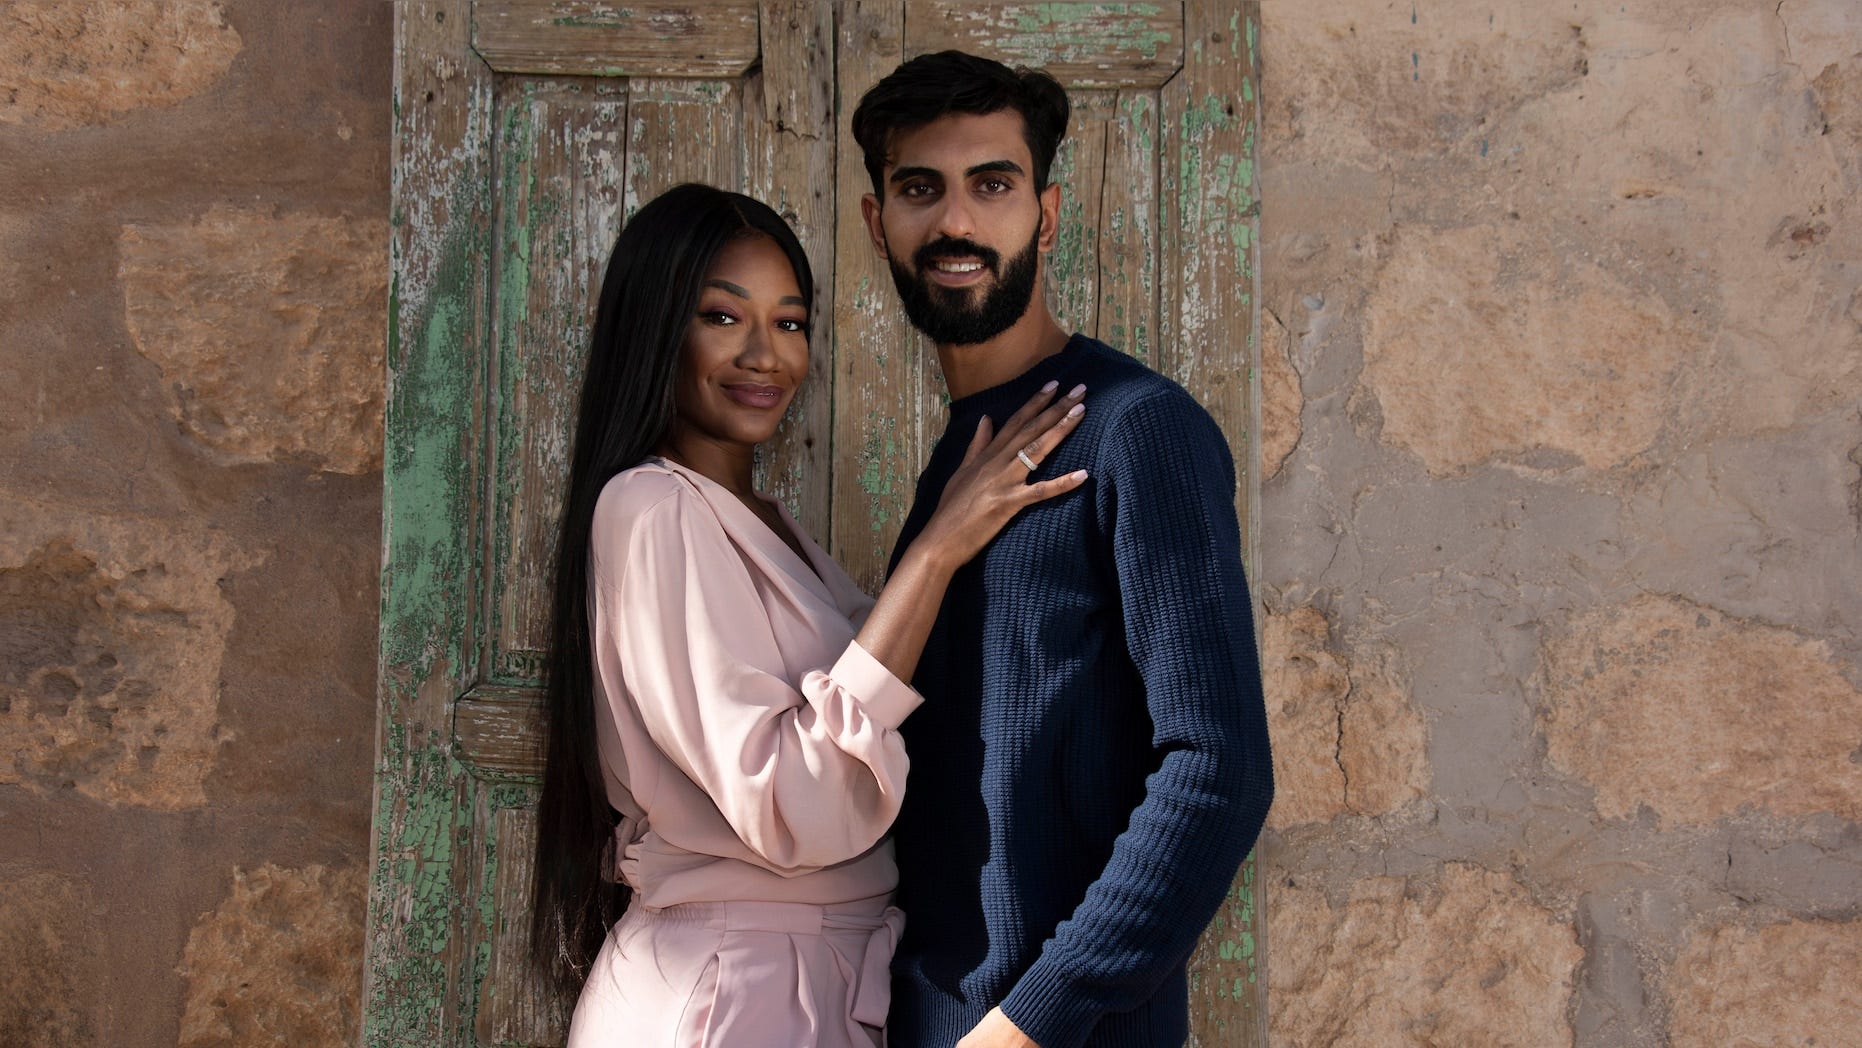 FOX NEWS: '90 Day Fiancé' star Brittany Banks asks fiancé Yazan to move to US amid questions of safety December 1, 2020 at 08:07AM